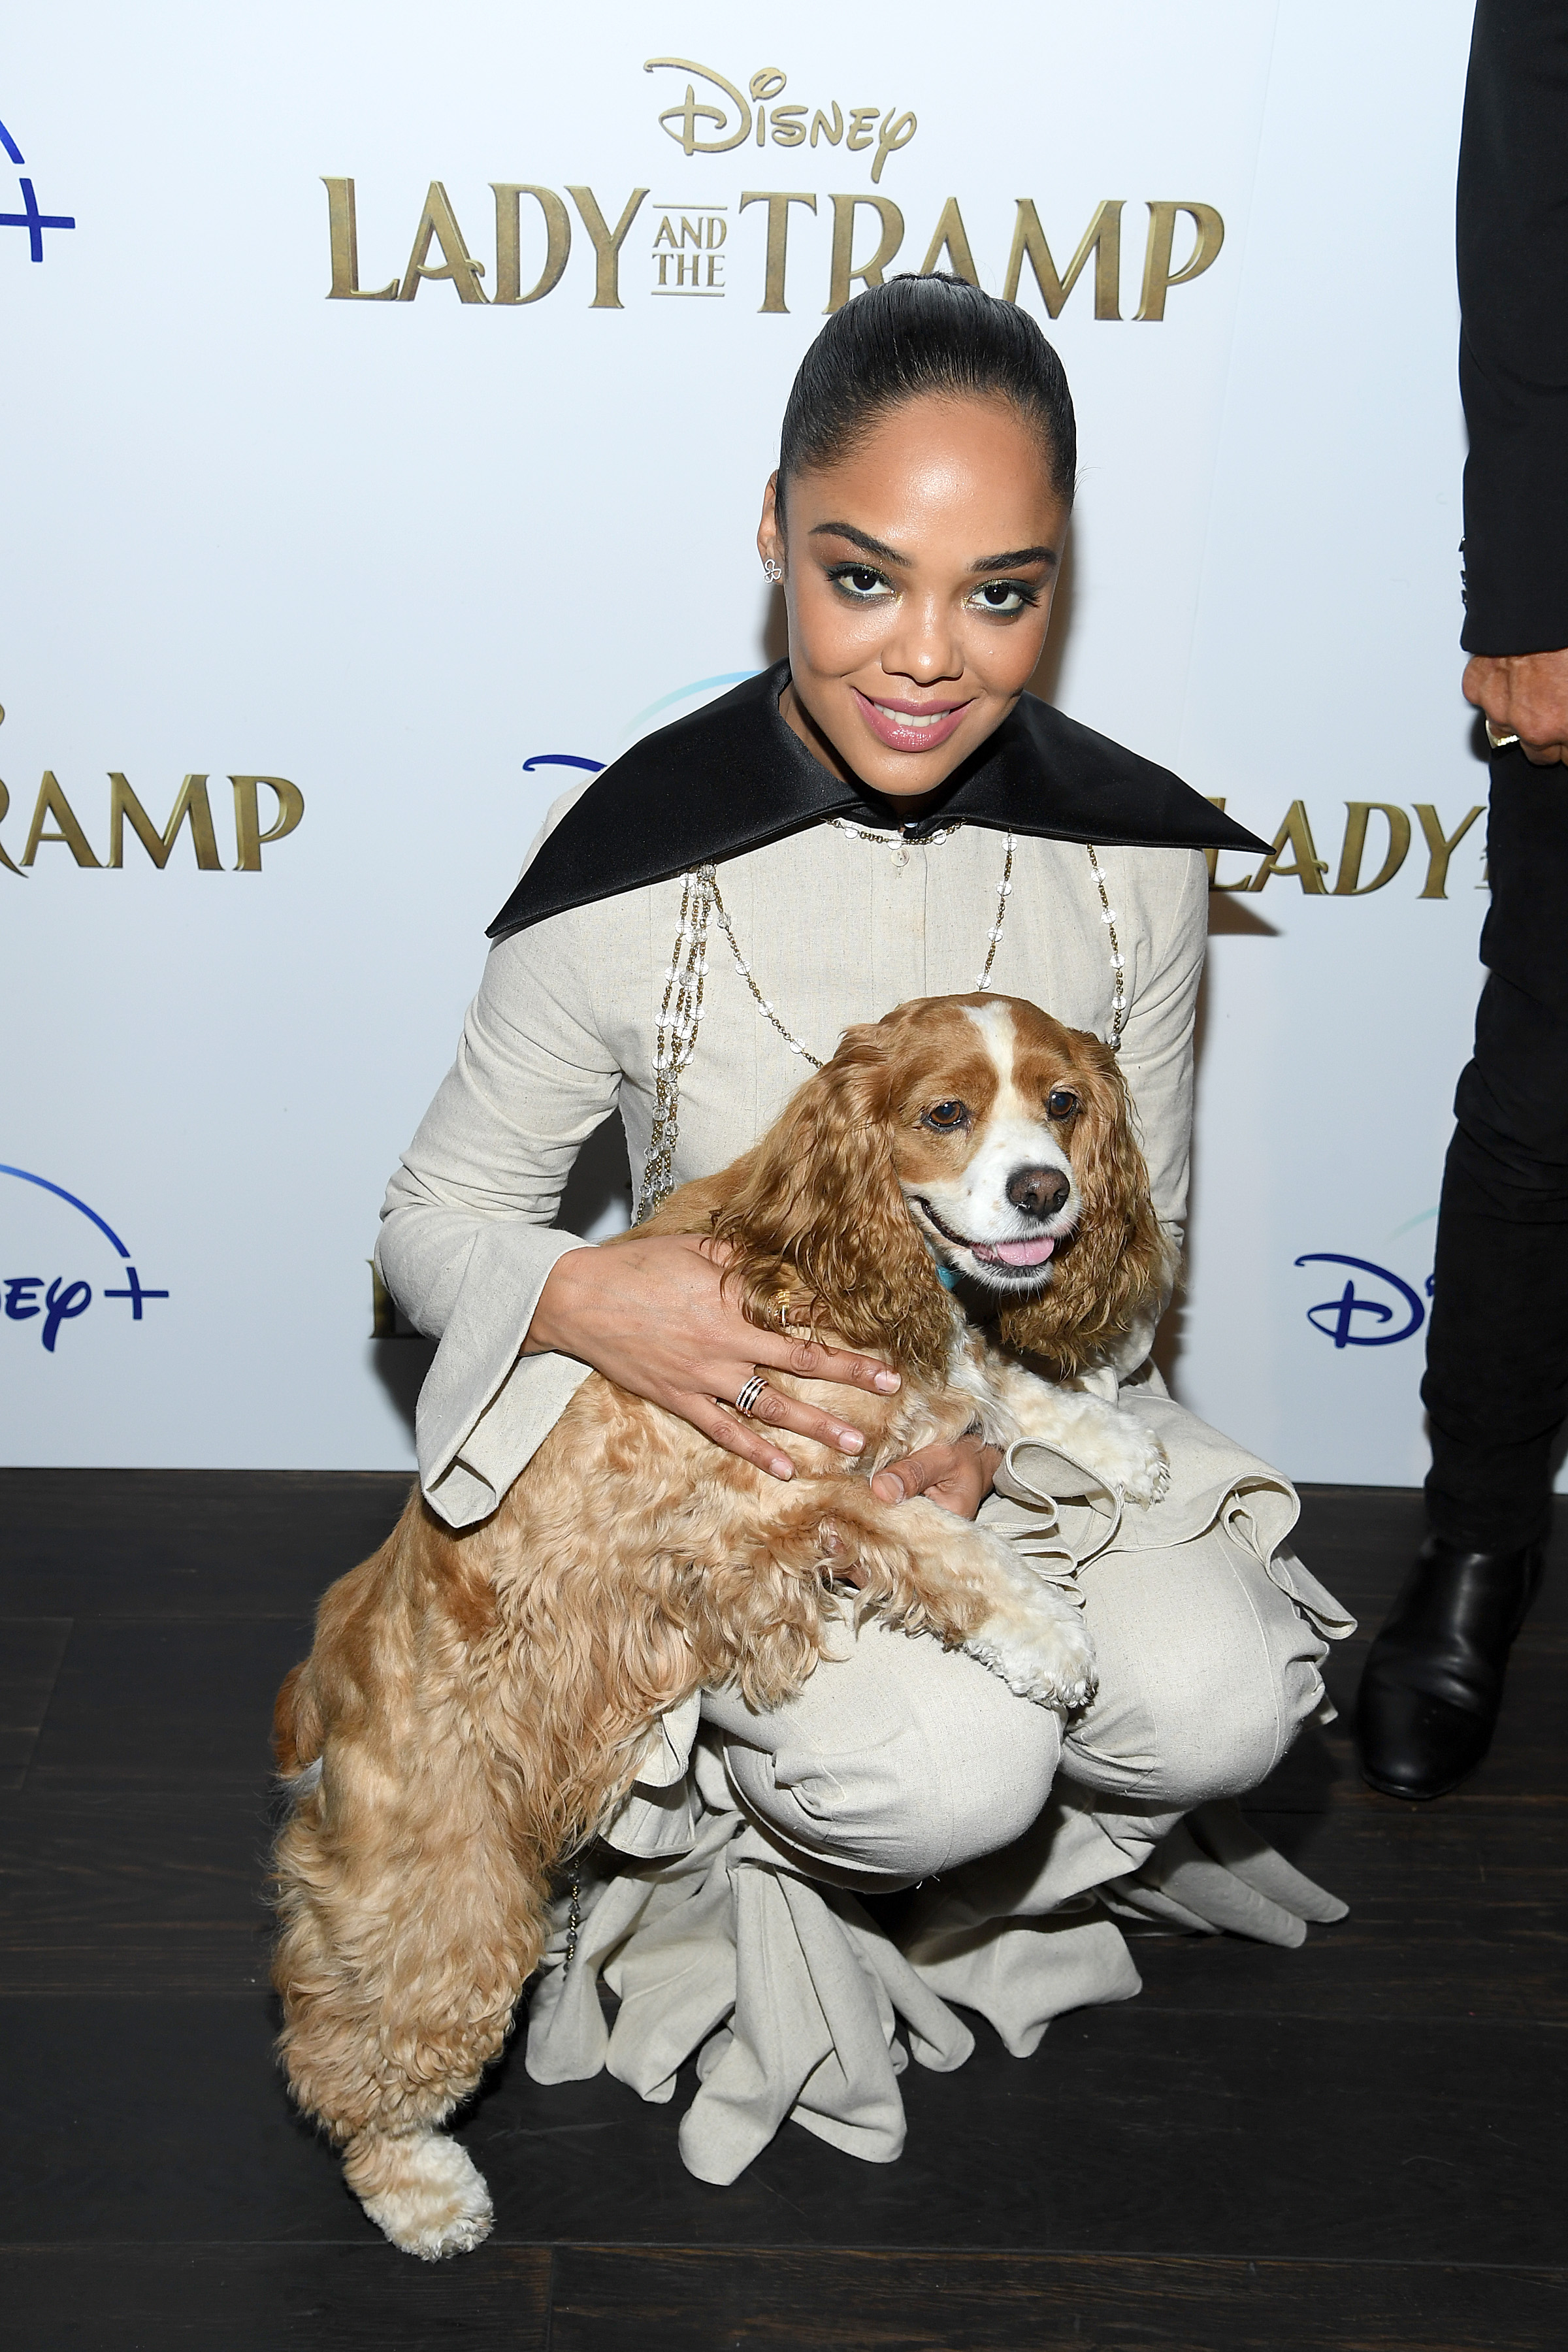 DISNEY+ “LADY AND THE TRAMP” NY SPECIAL SCREENING